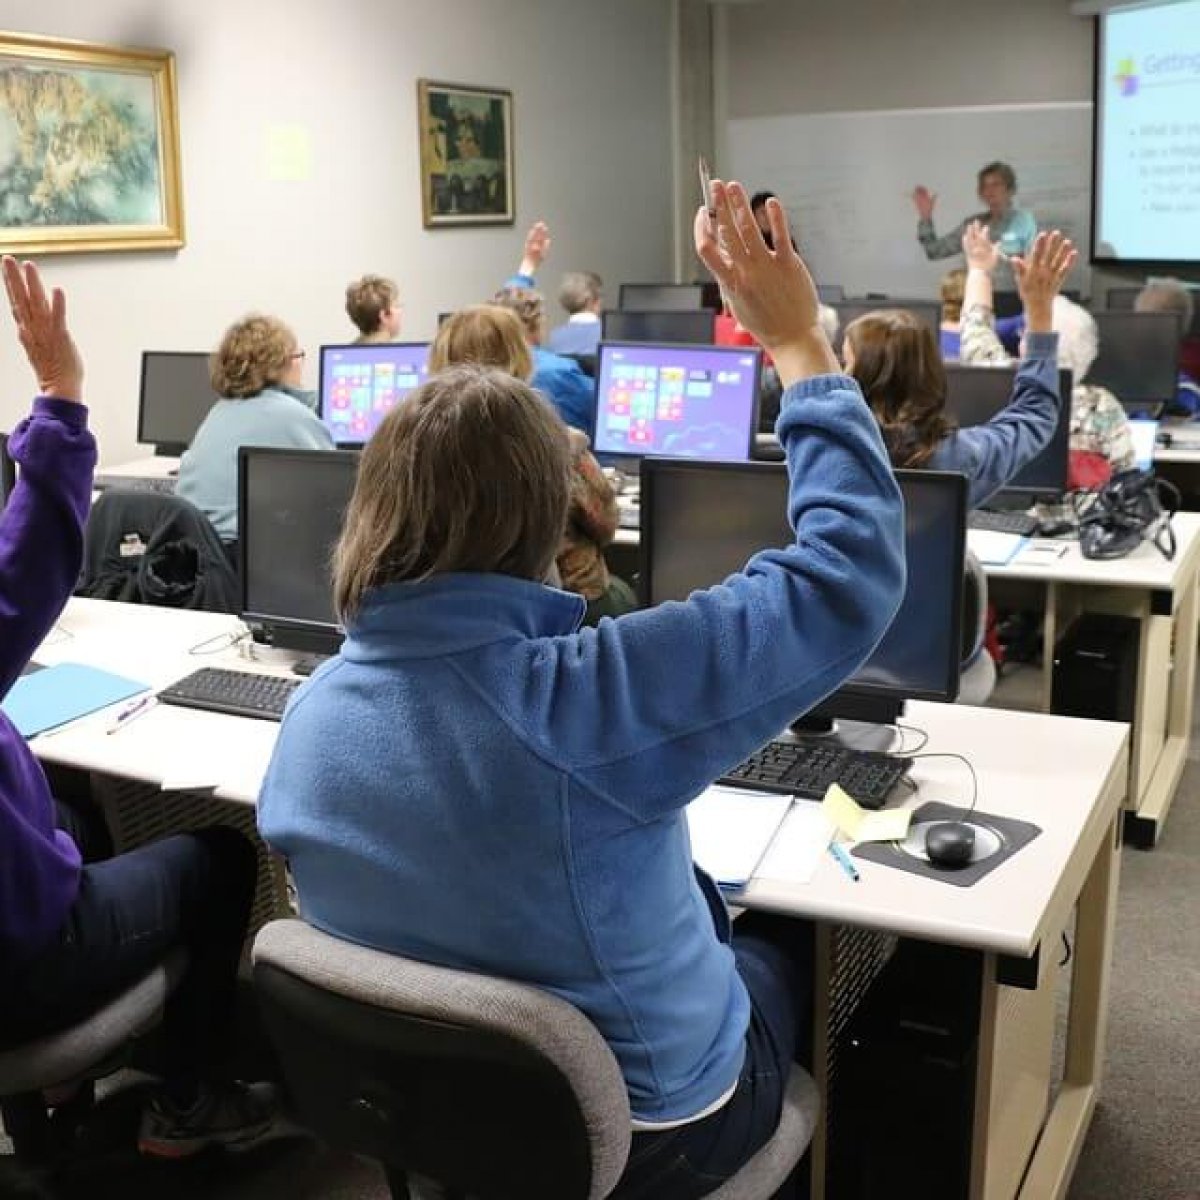 A photo of adult students seated at desks raising their hands